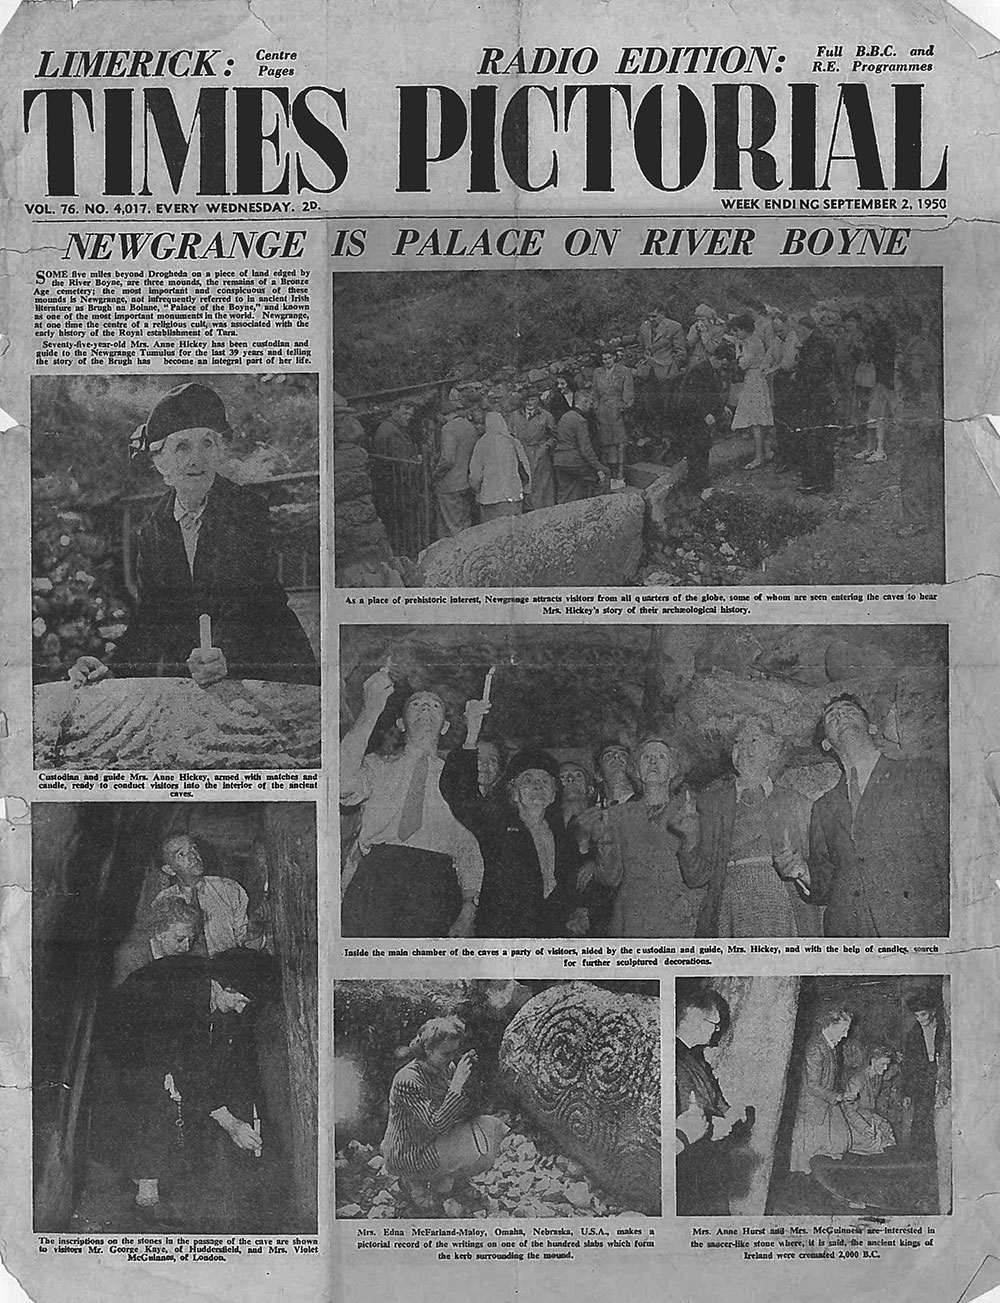 A newspaper article about Newgrange featuring Mrs Ann Hickey from 1950.